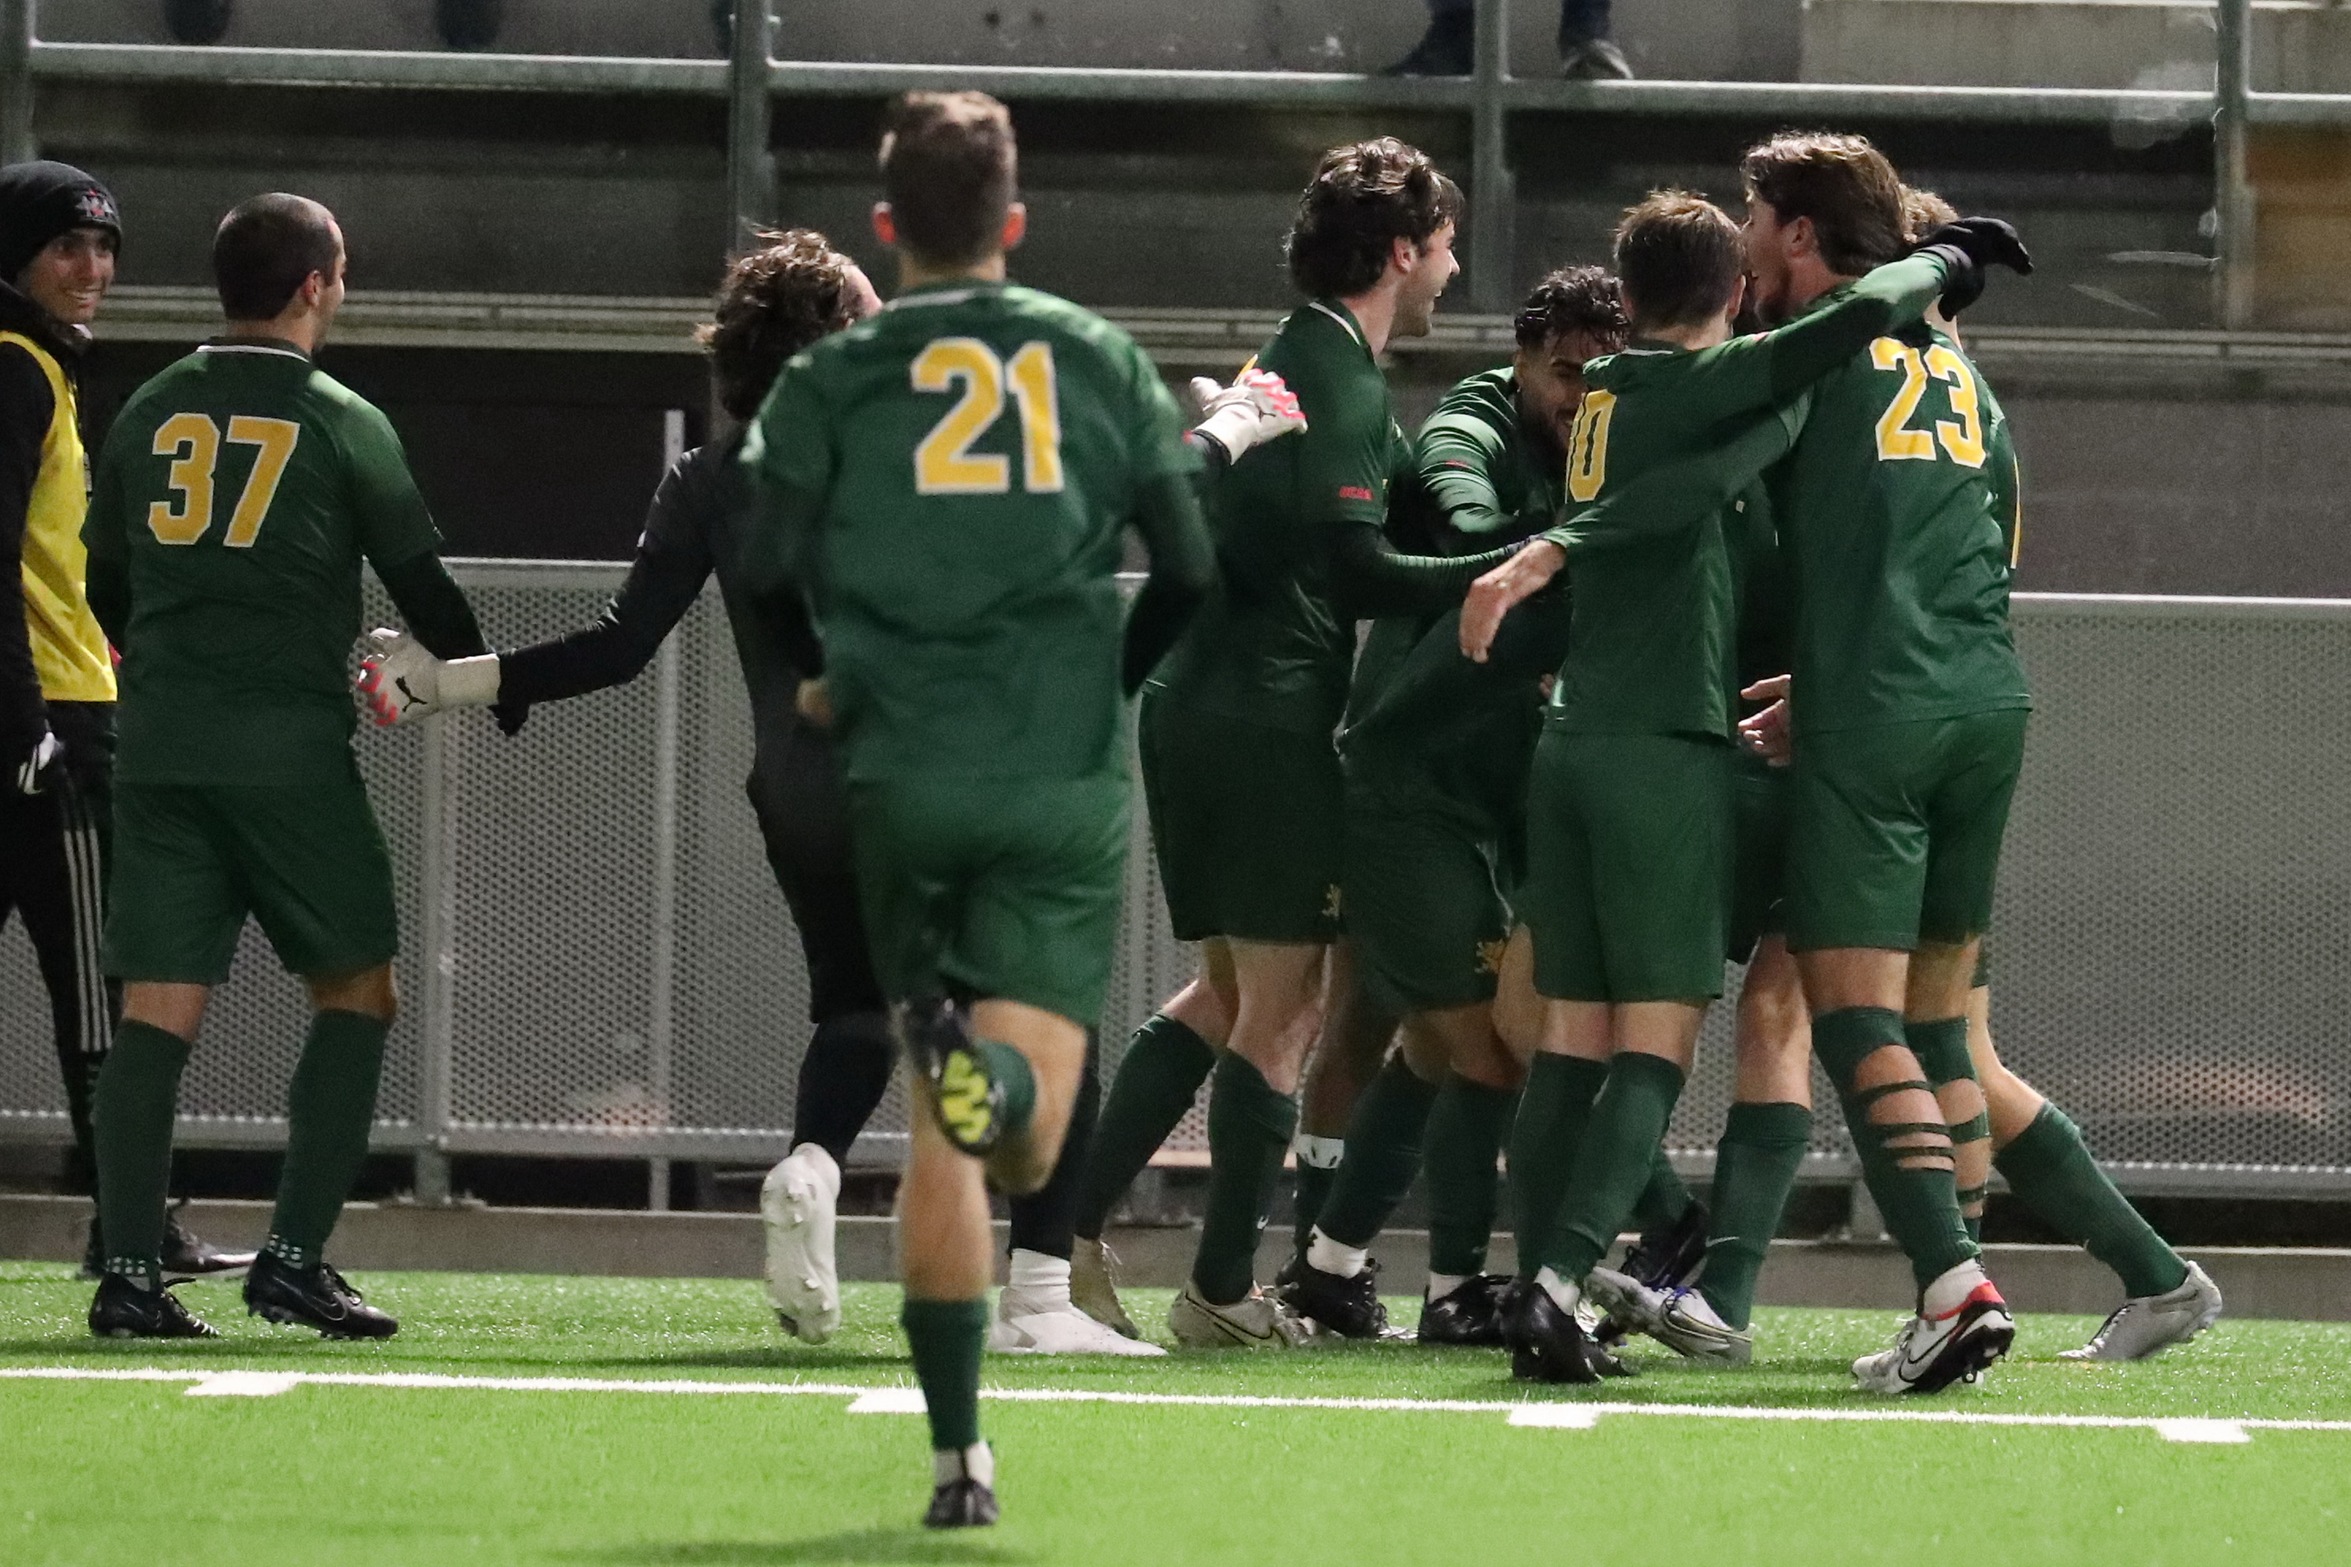 Men's Soccer to Play for National Bronze Saturday